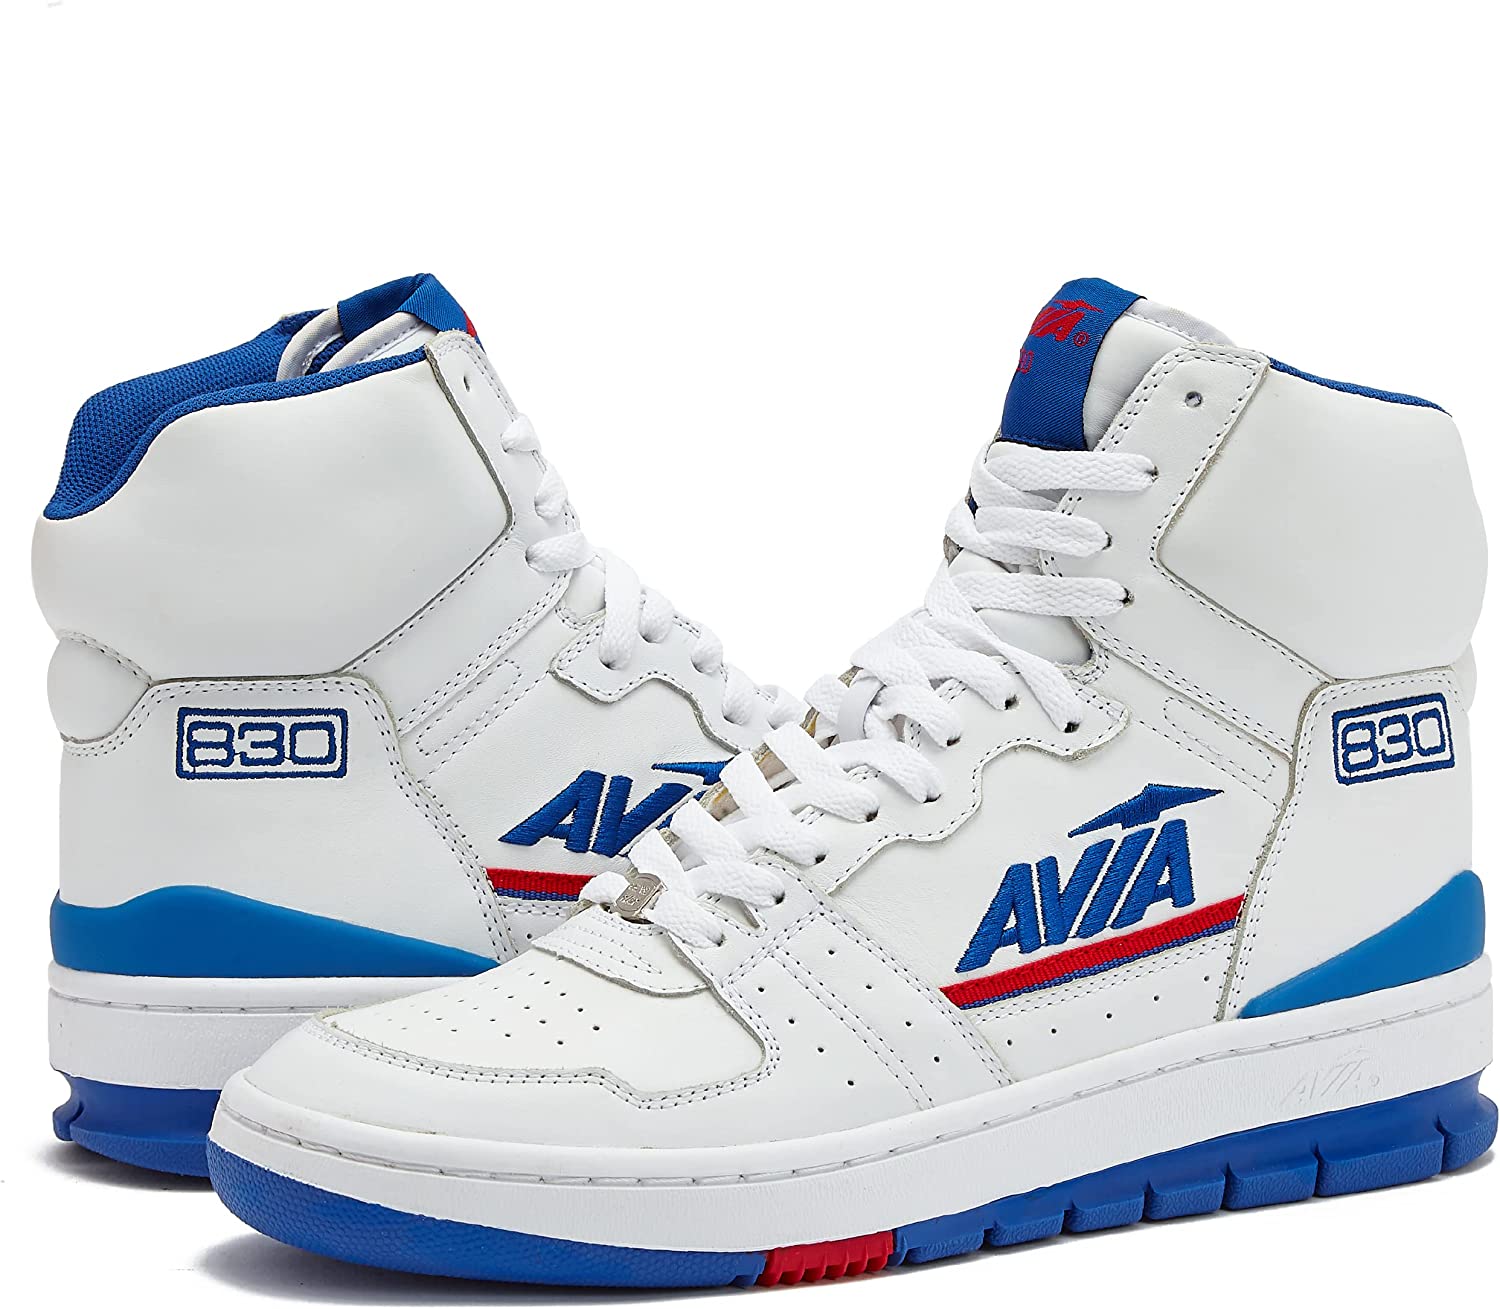 Avia 830 Men's Basketball Shoes, Retro Sneakers for Indoor or